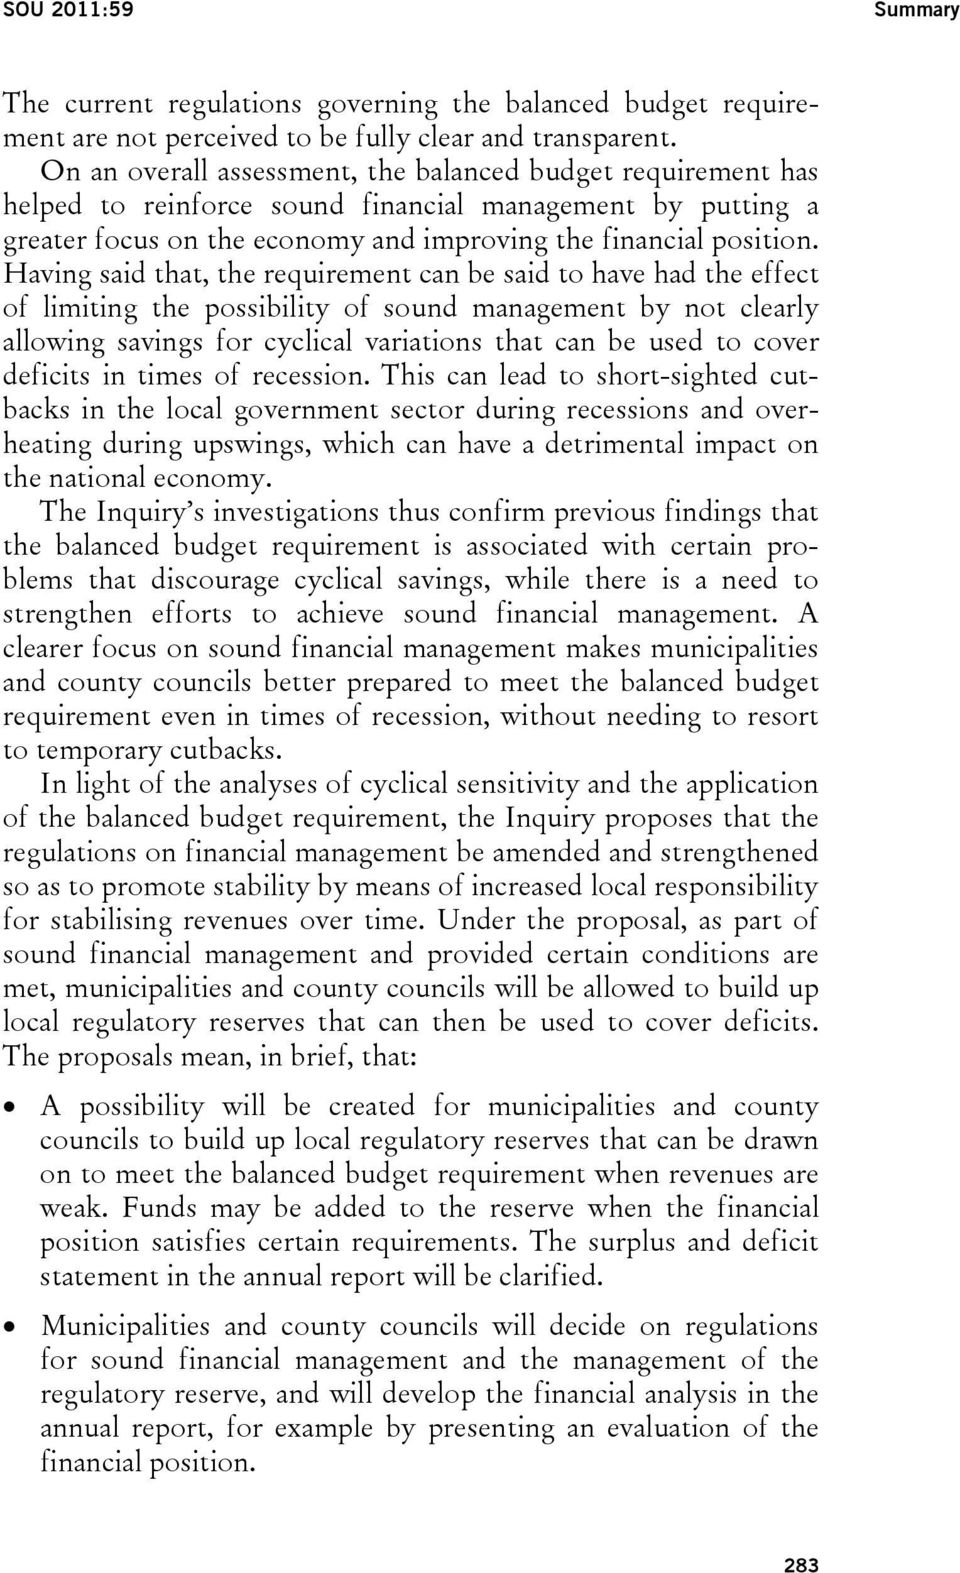 Having said that, the requirement can be said to have had the effect of limiting the possibility of sound management by not clearly allowing savings for cyclical variations that can be used to cover